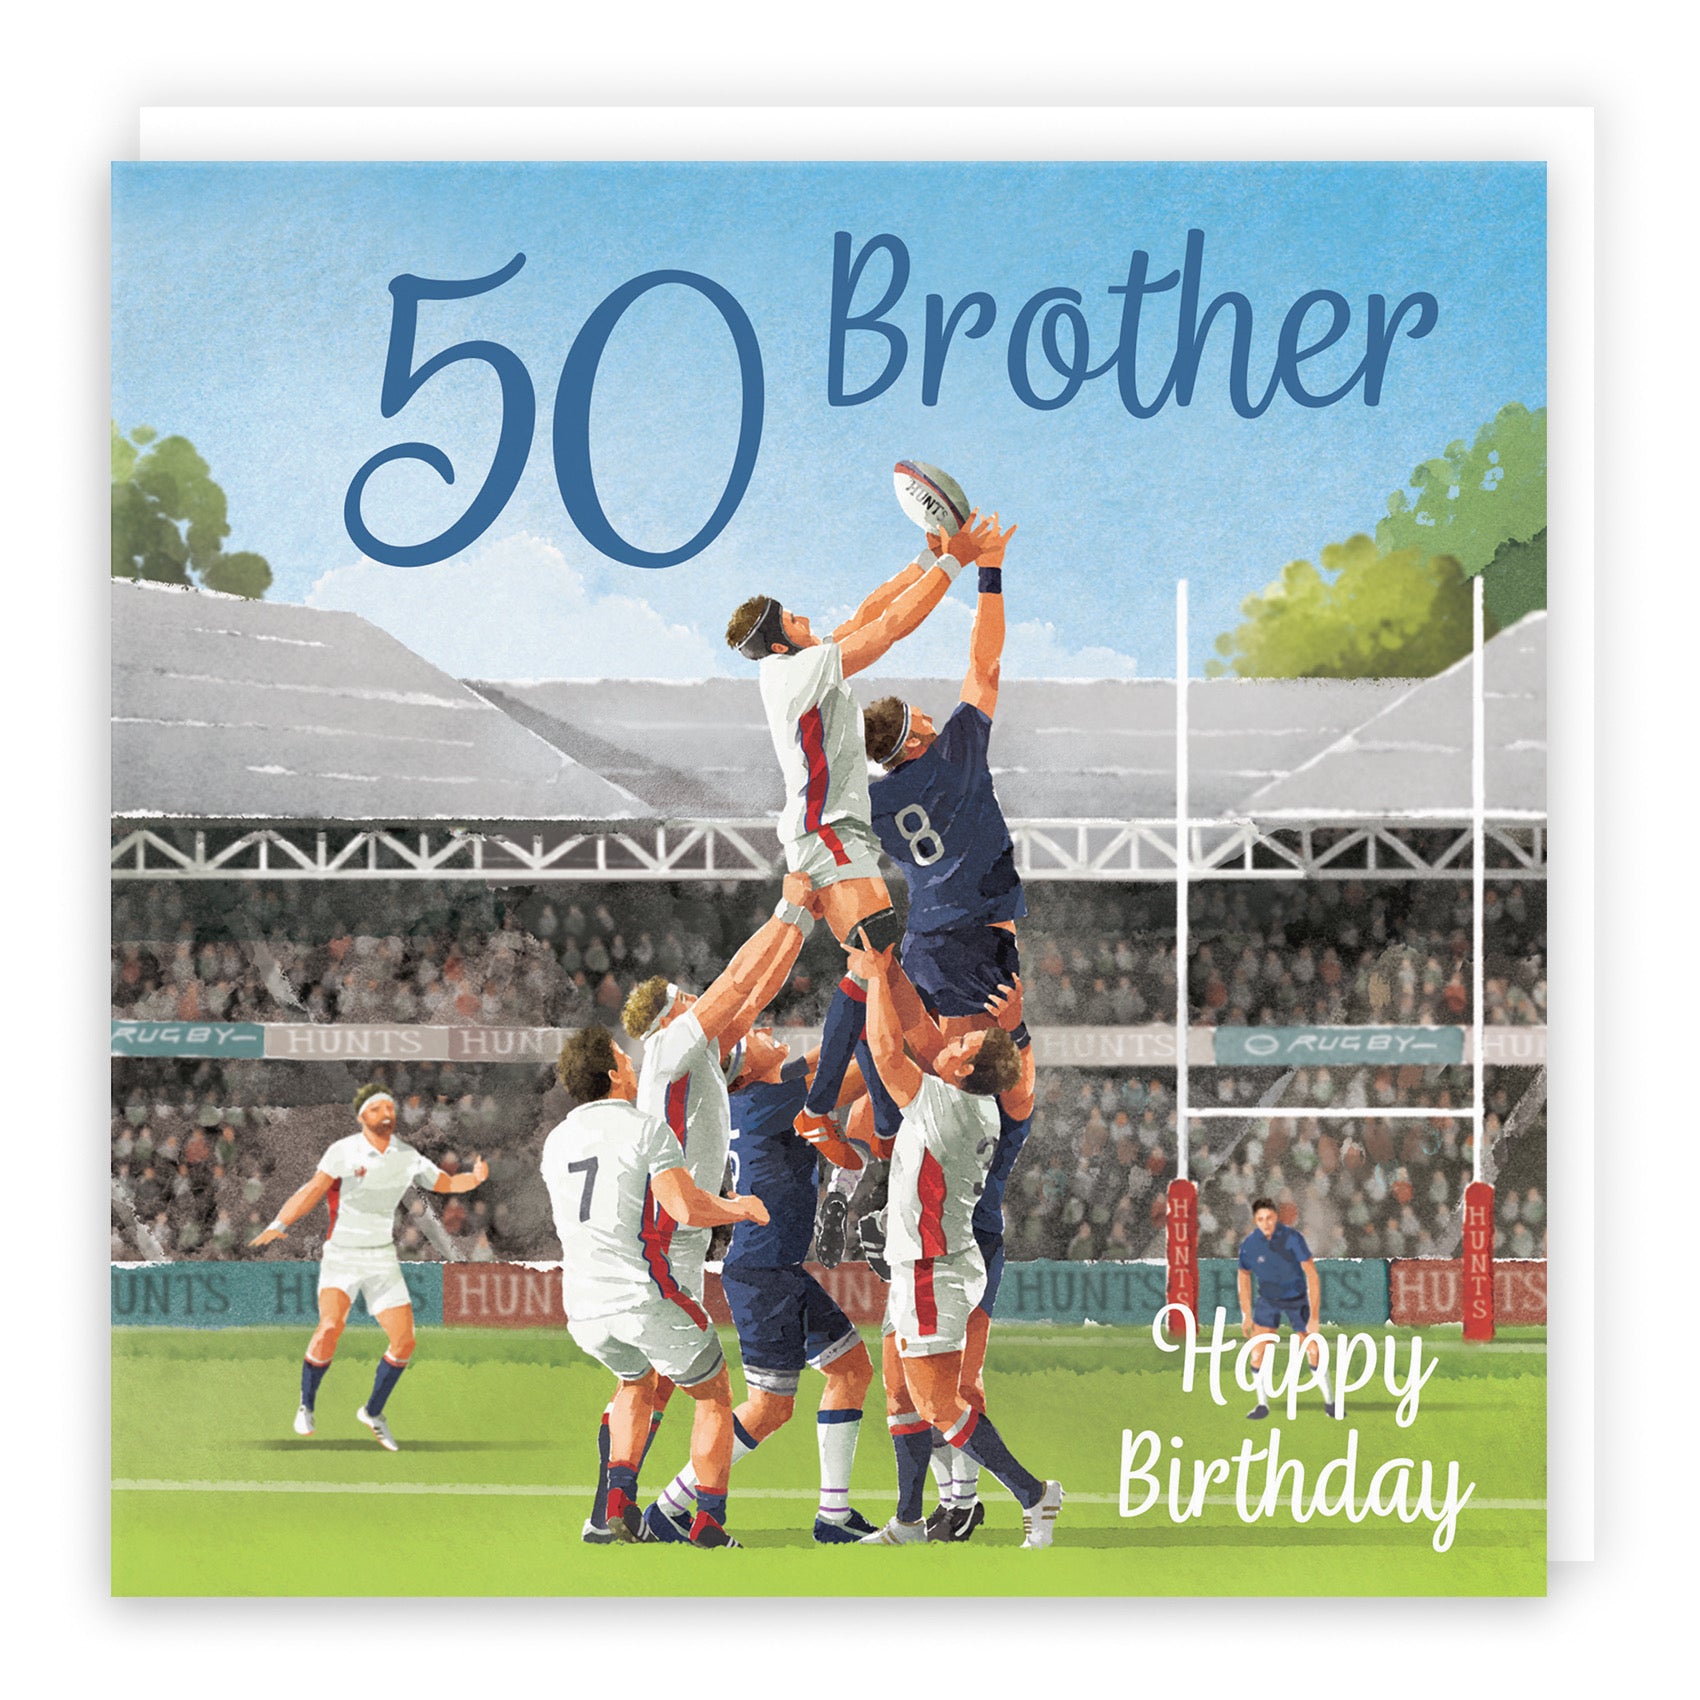 50th Brother Rugby Birthday Card Milo's Gallery - Default Title (B0CPRCJ2VK)